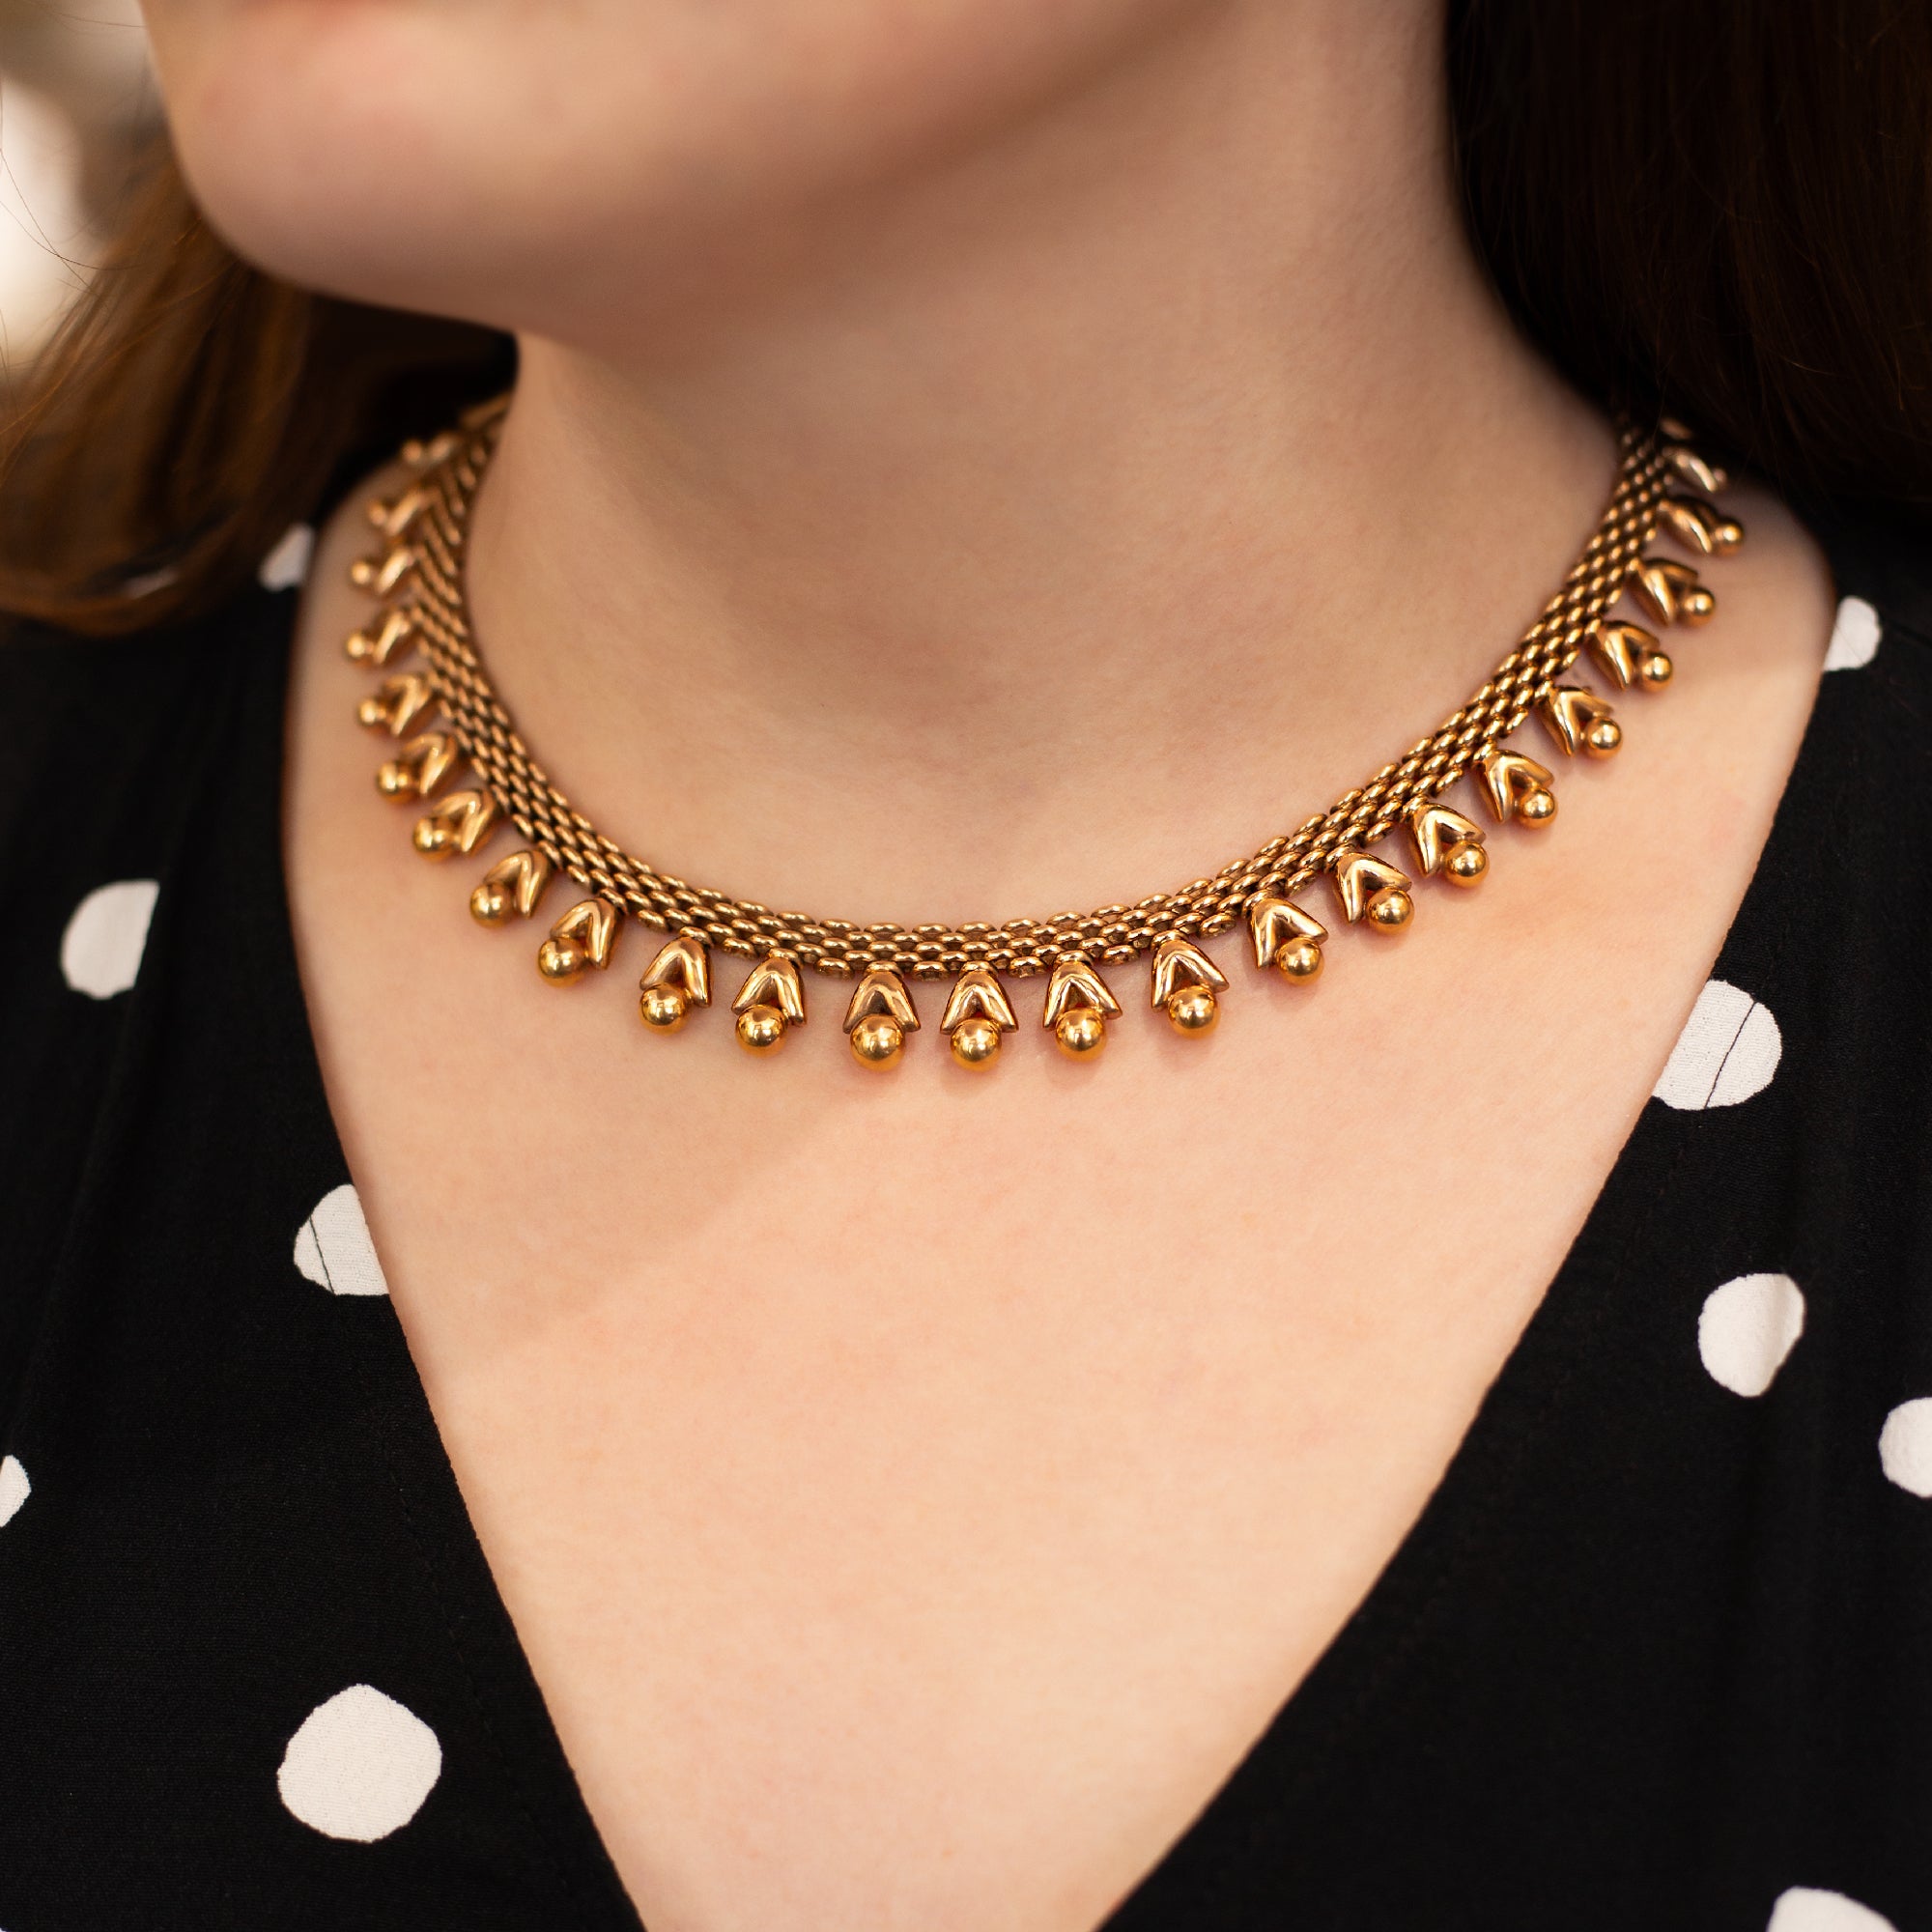 How to Find the Right Necklace Length